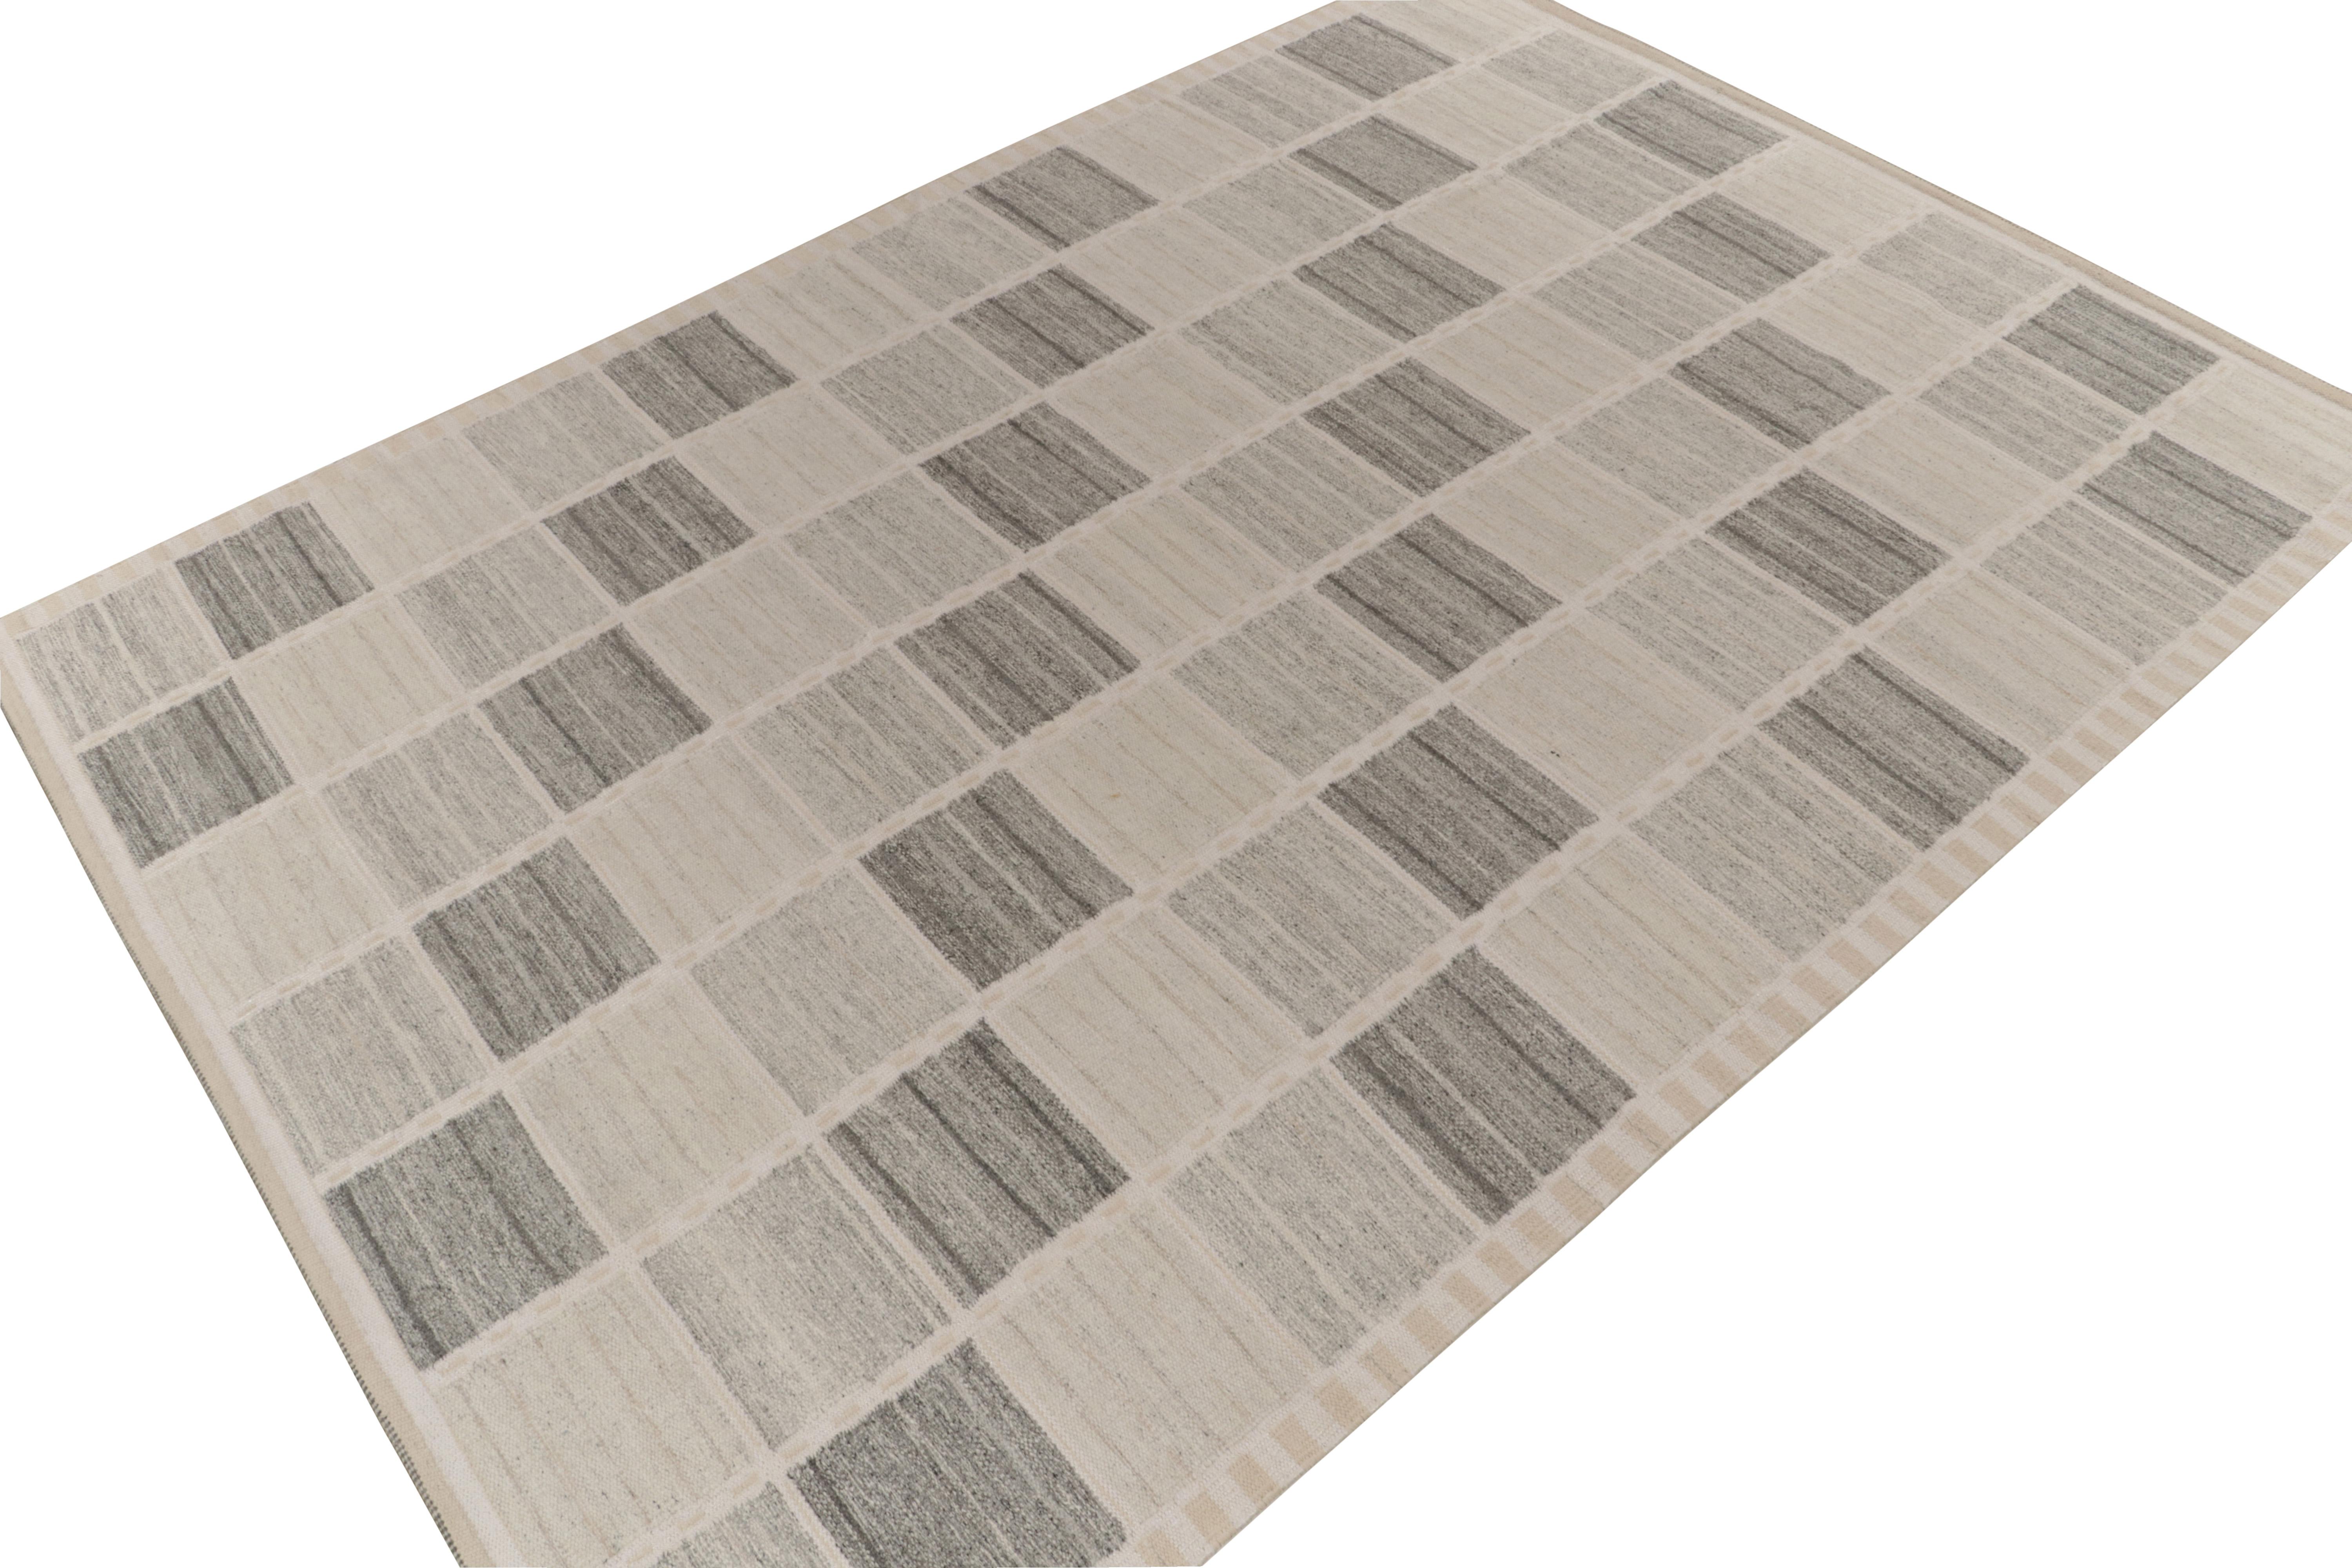 Exemplifying a modern take on Swedish Deco styles, a 8x10 flat weave from Rug & Kilim’s award-winning Scandinavian Kilim collection. 

Further on the Condition: 

The handwoven wool rug enjoys compartmentalisation in gray and white tones—alternating